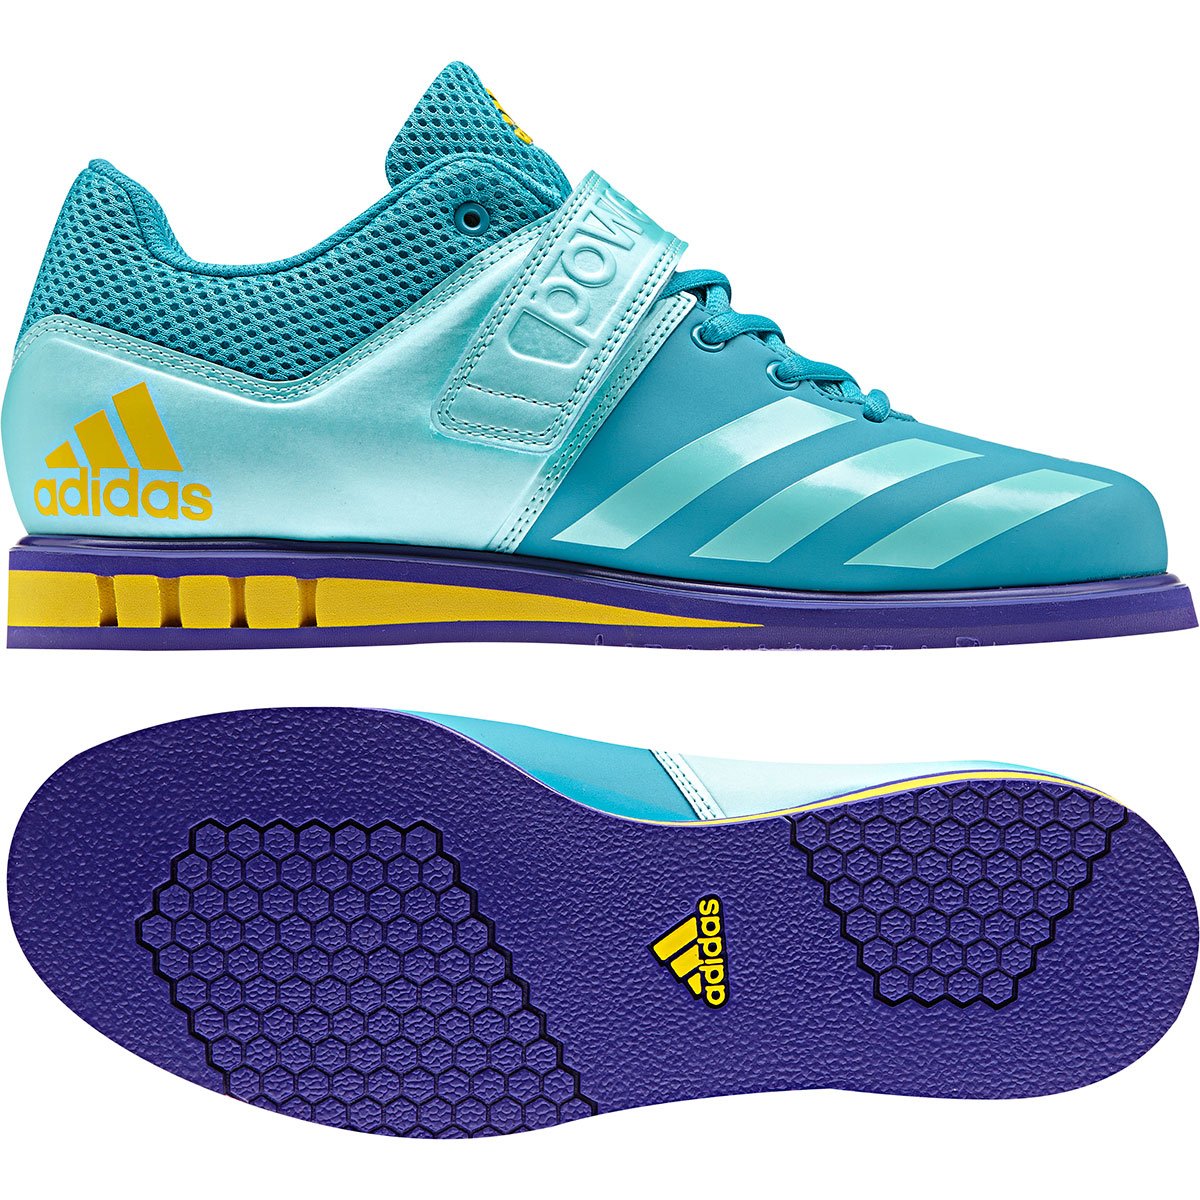 Adidas Womens Powerlift 3.1 Weightlifting Shoes